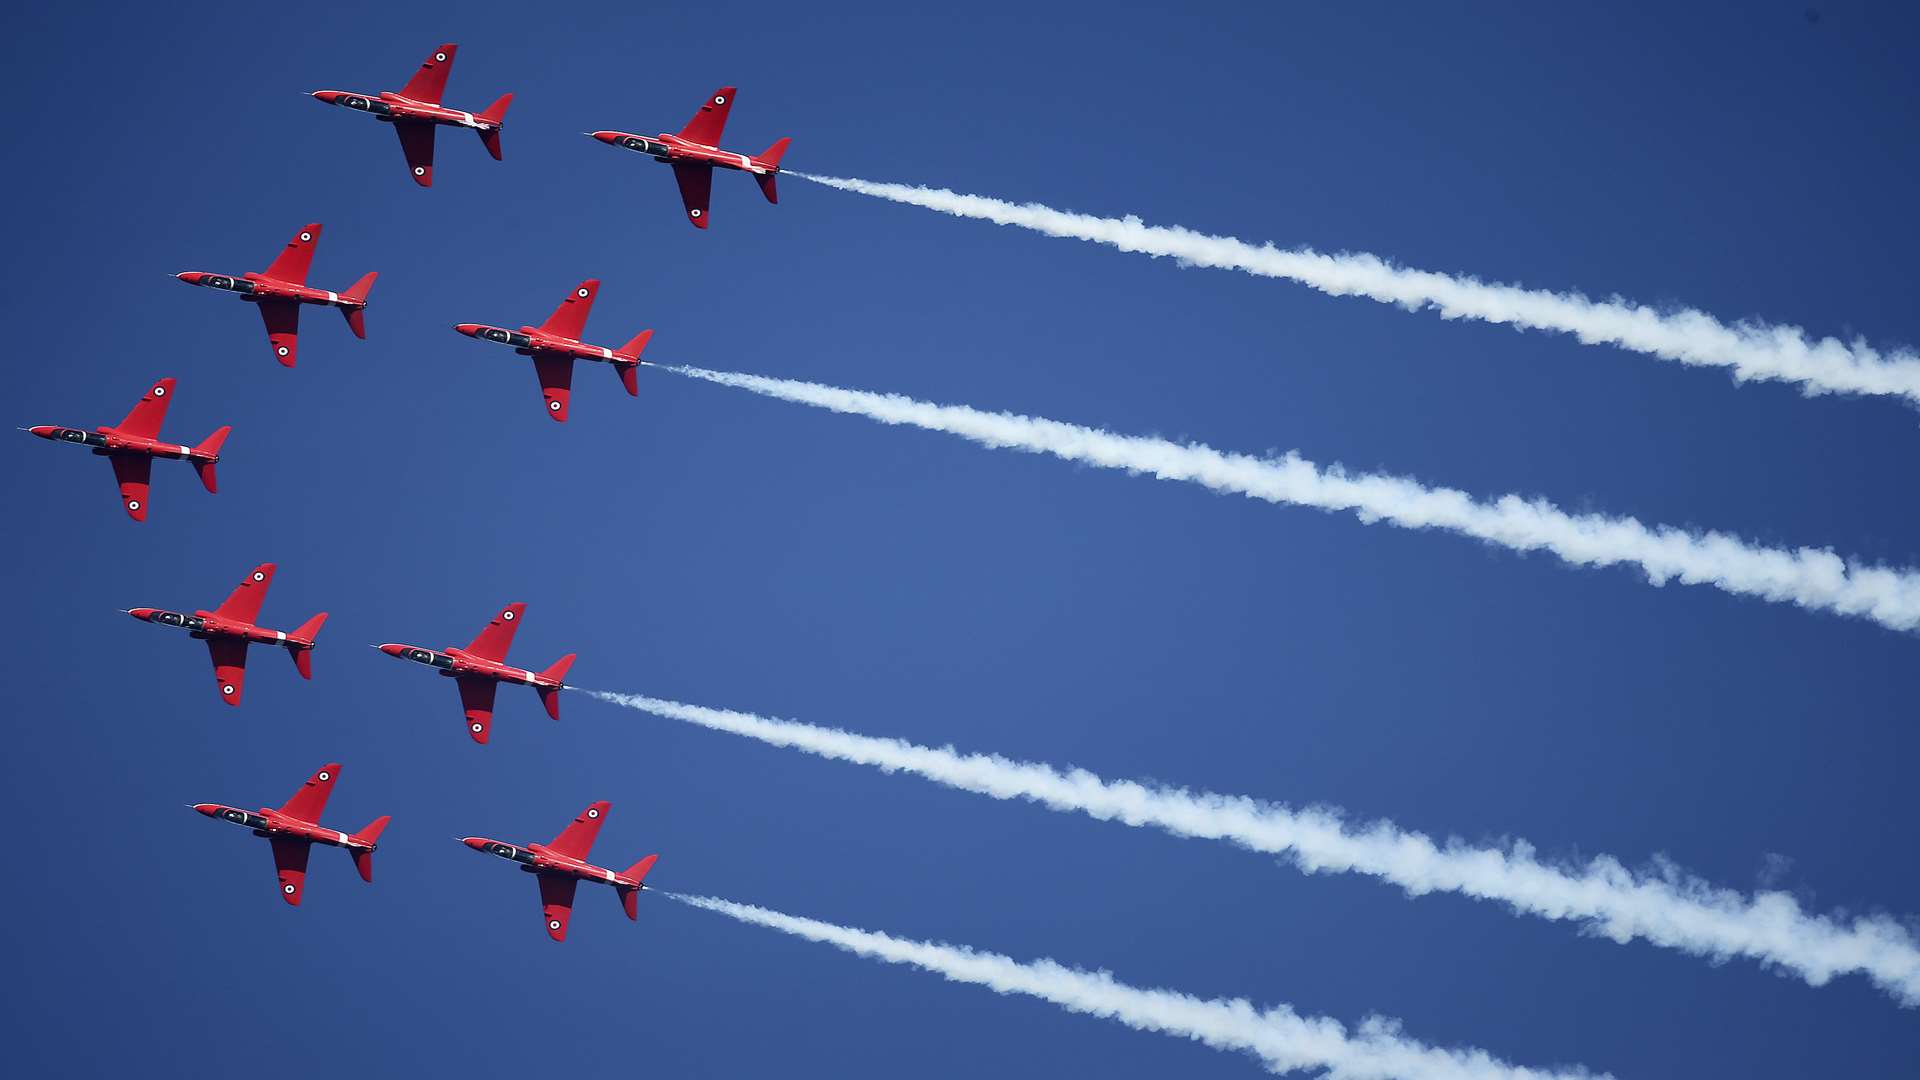 The Red Arrows are one of the world's leading aerobatic display teams